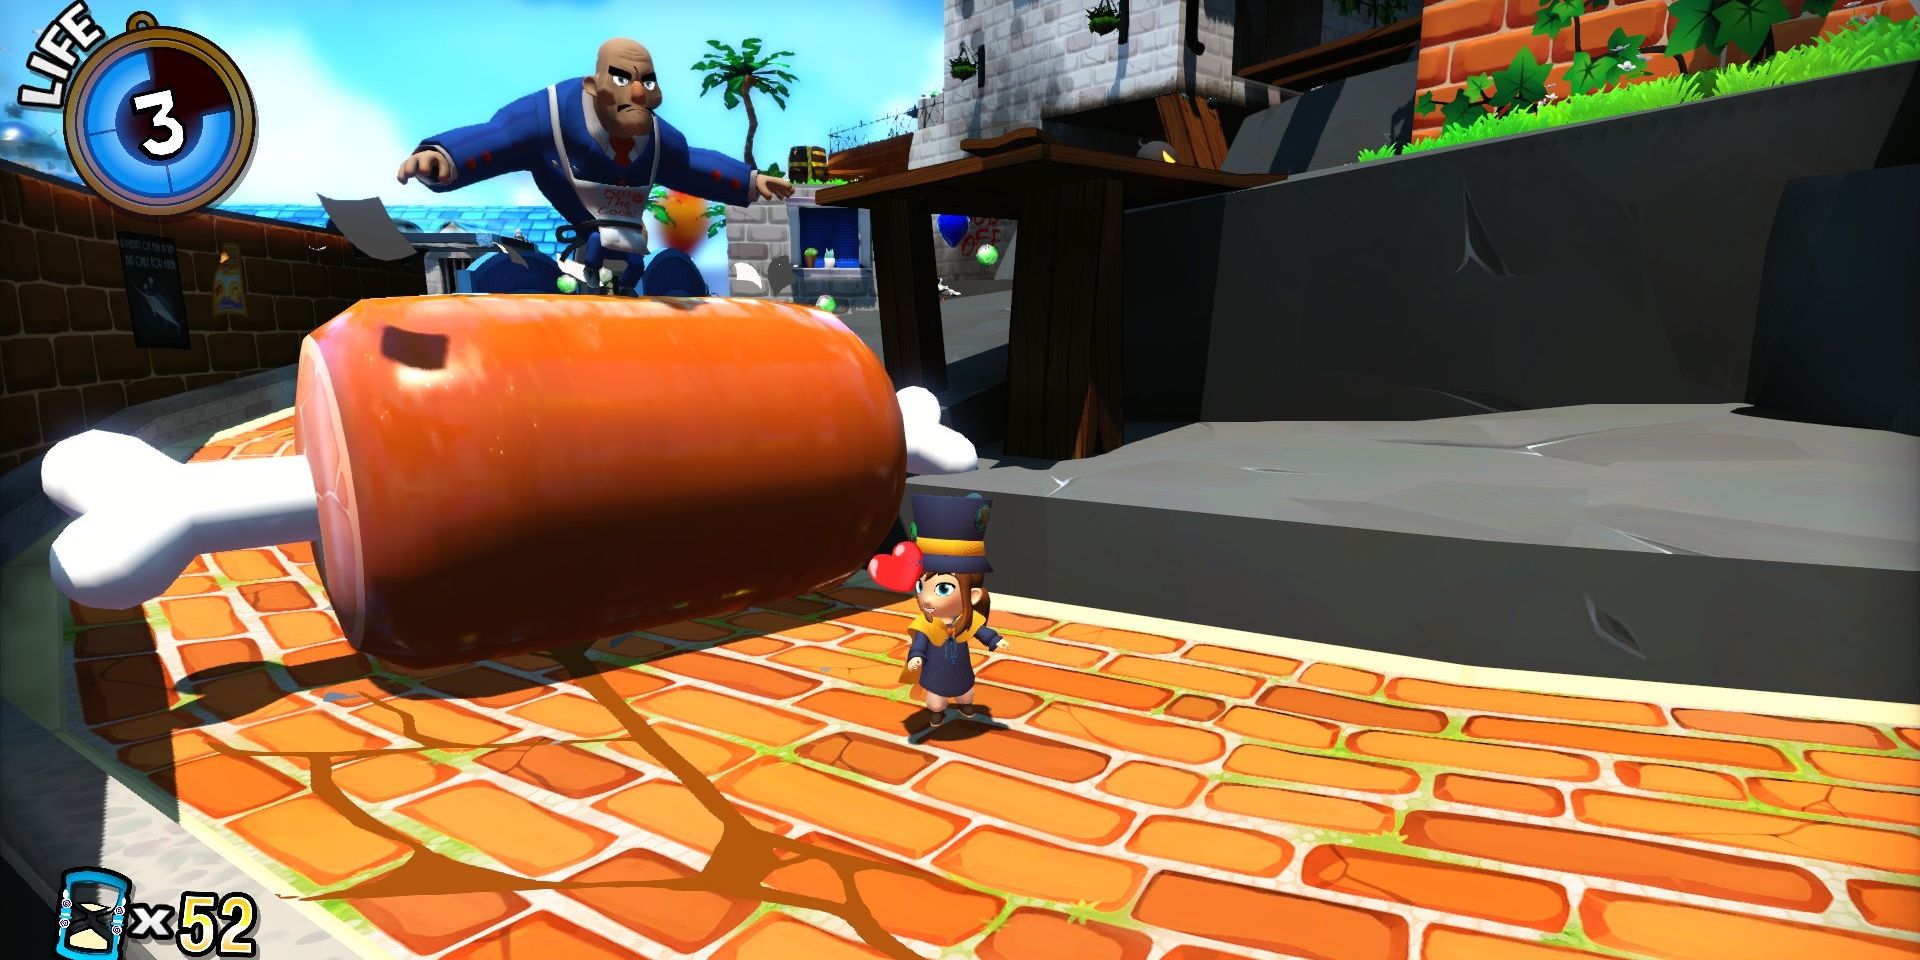 Hat Kid standing in a dangerous spot while everyone is frozen in A Hat In Time